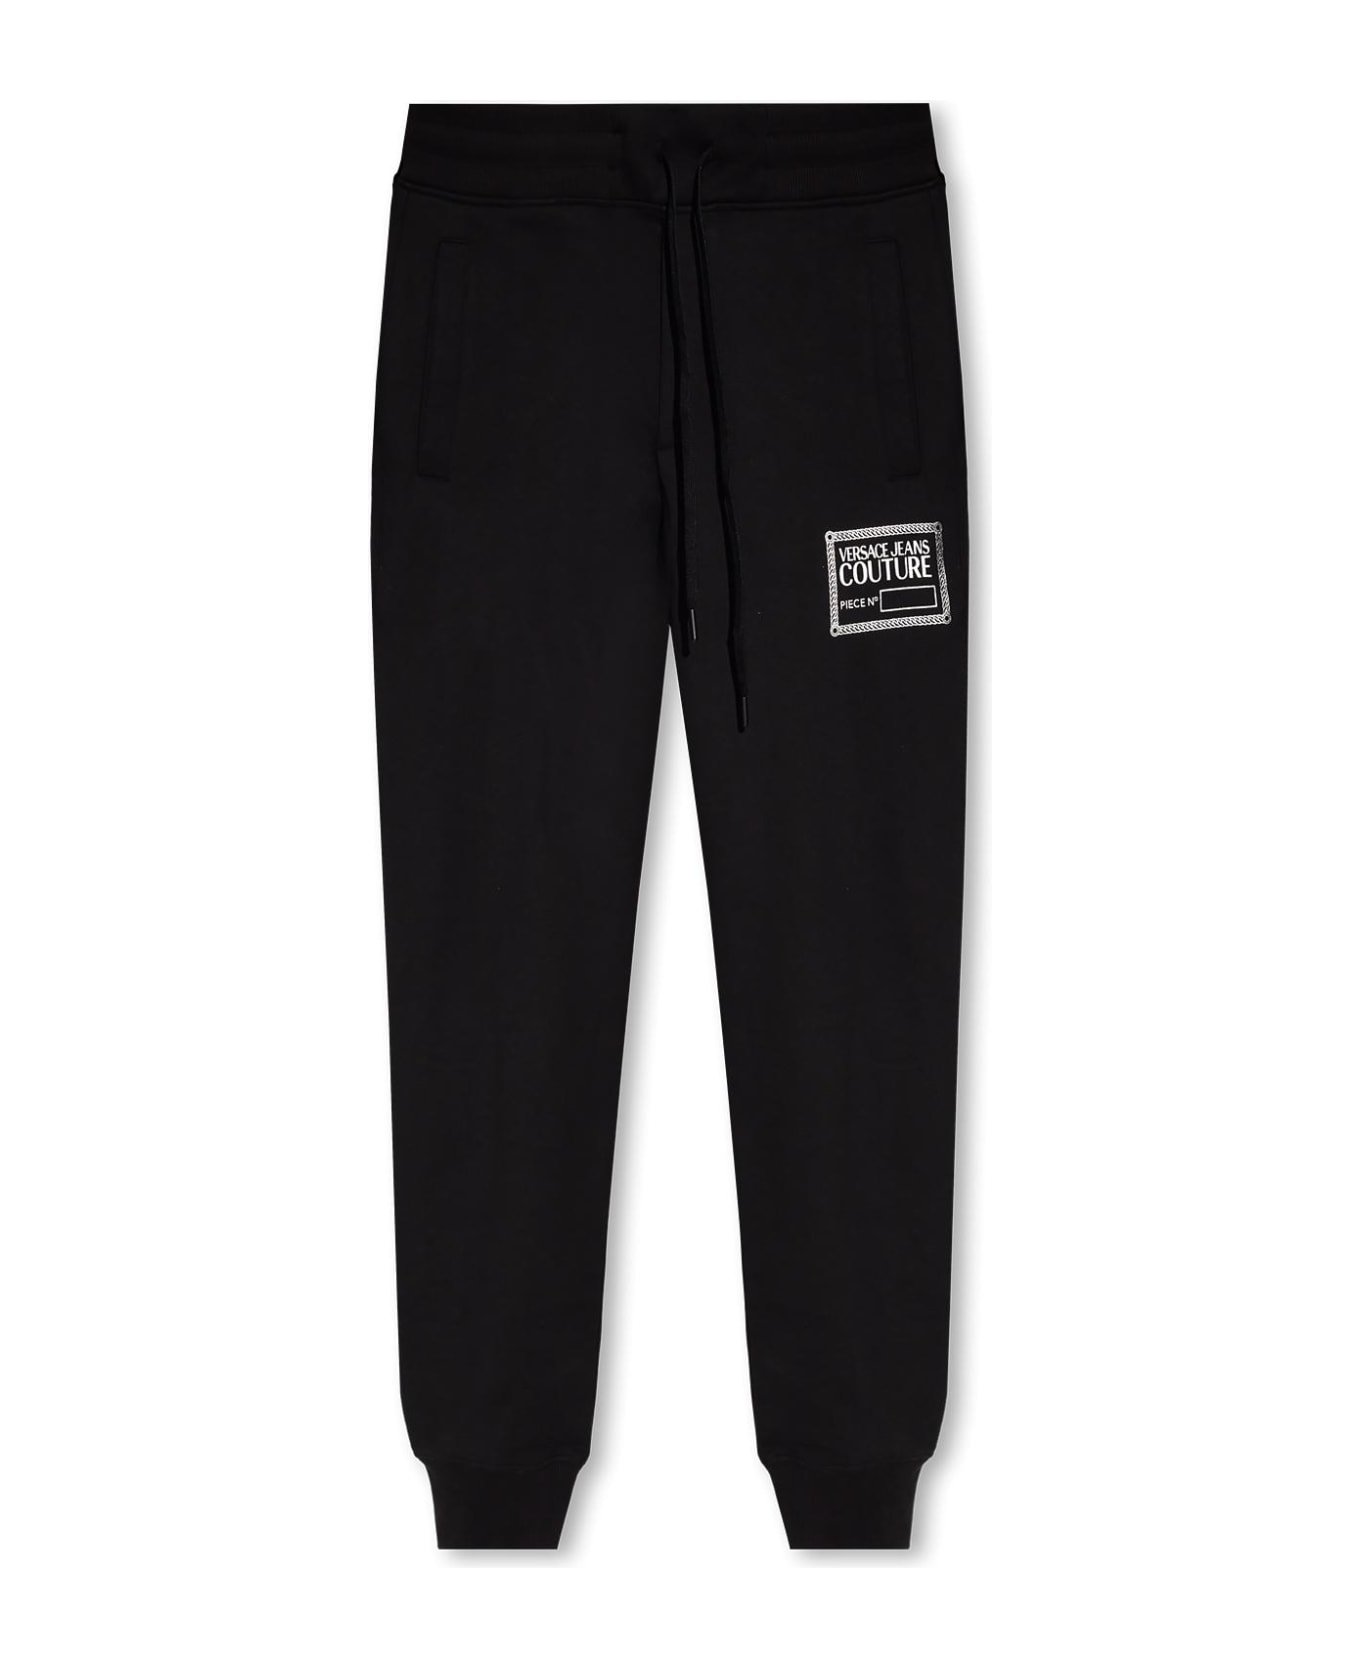 Versace Jeans Couture Jogging Trousers - Nero/argento